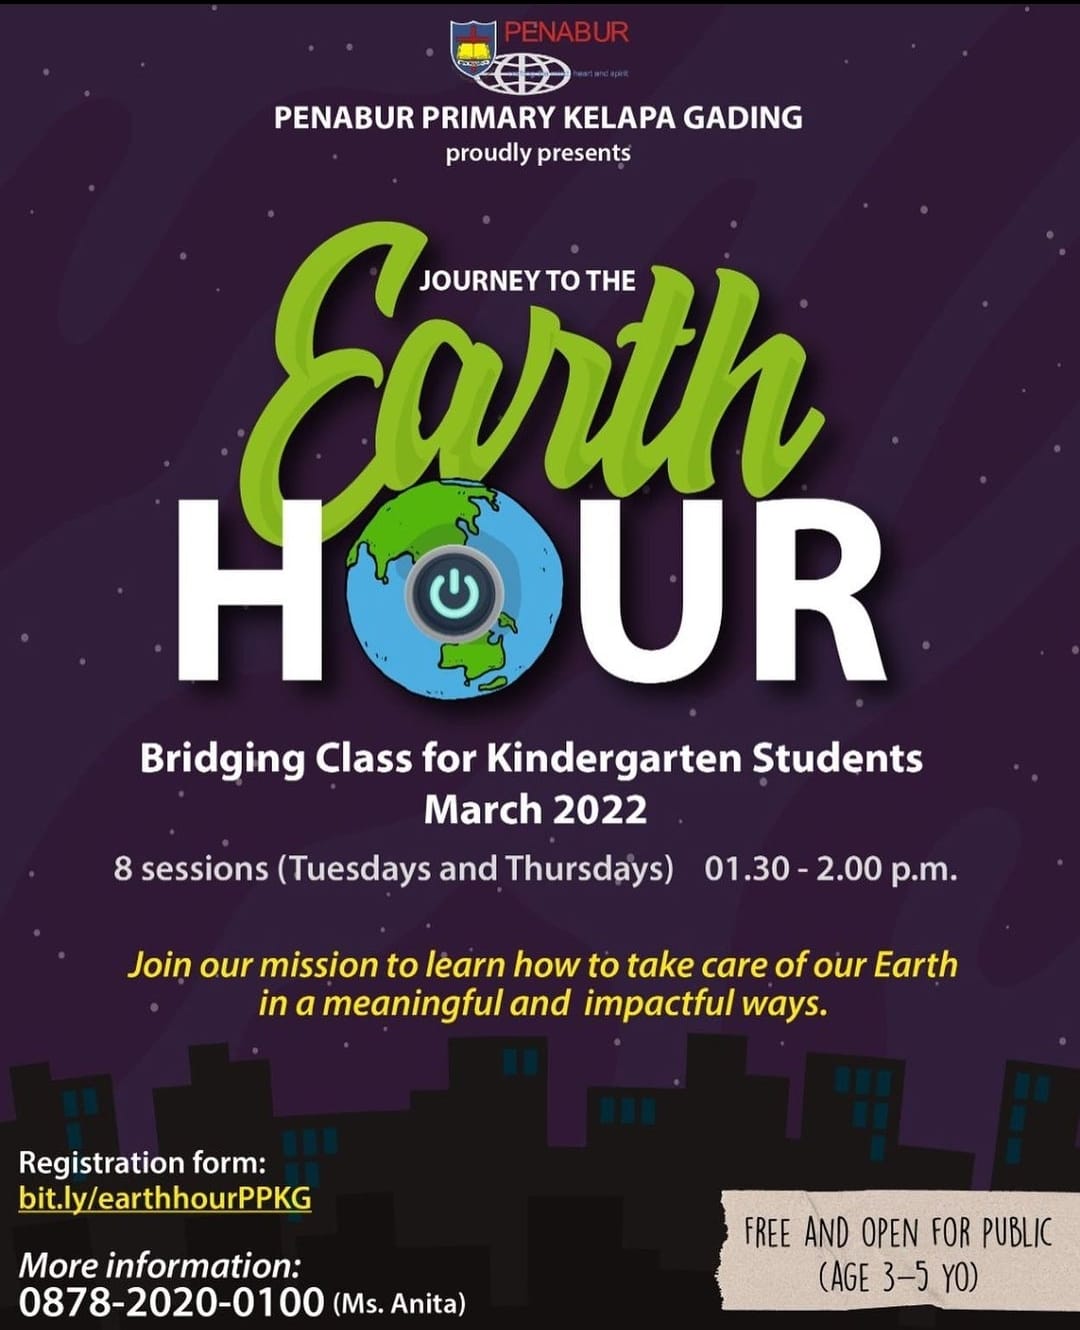 Journey to the Earth Hour